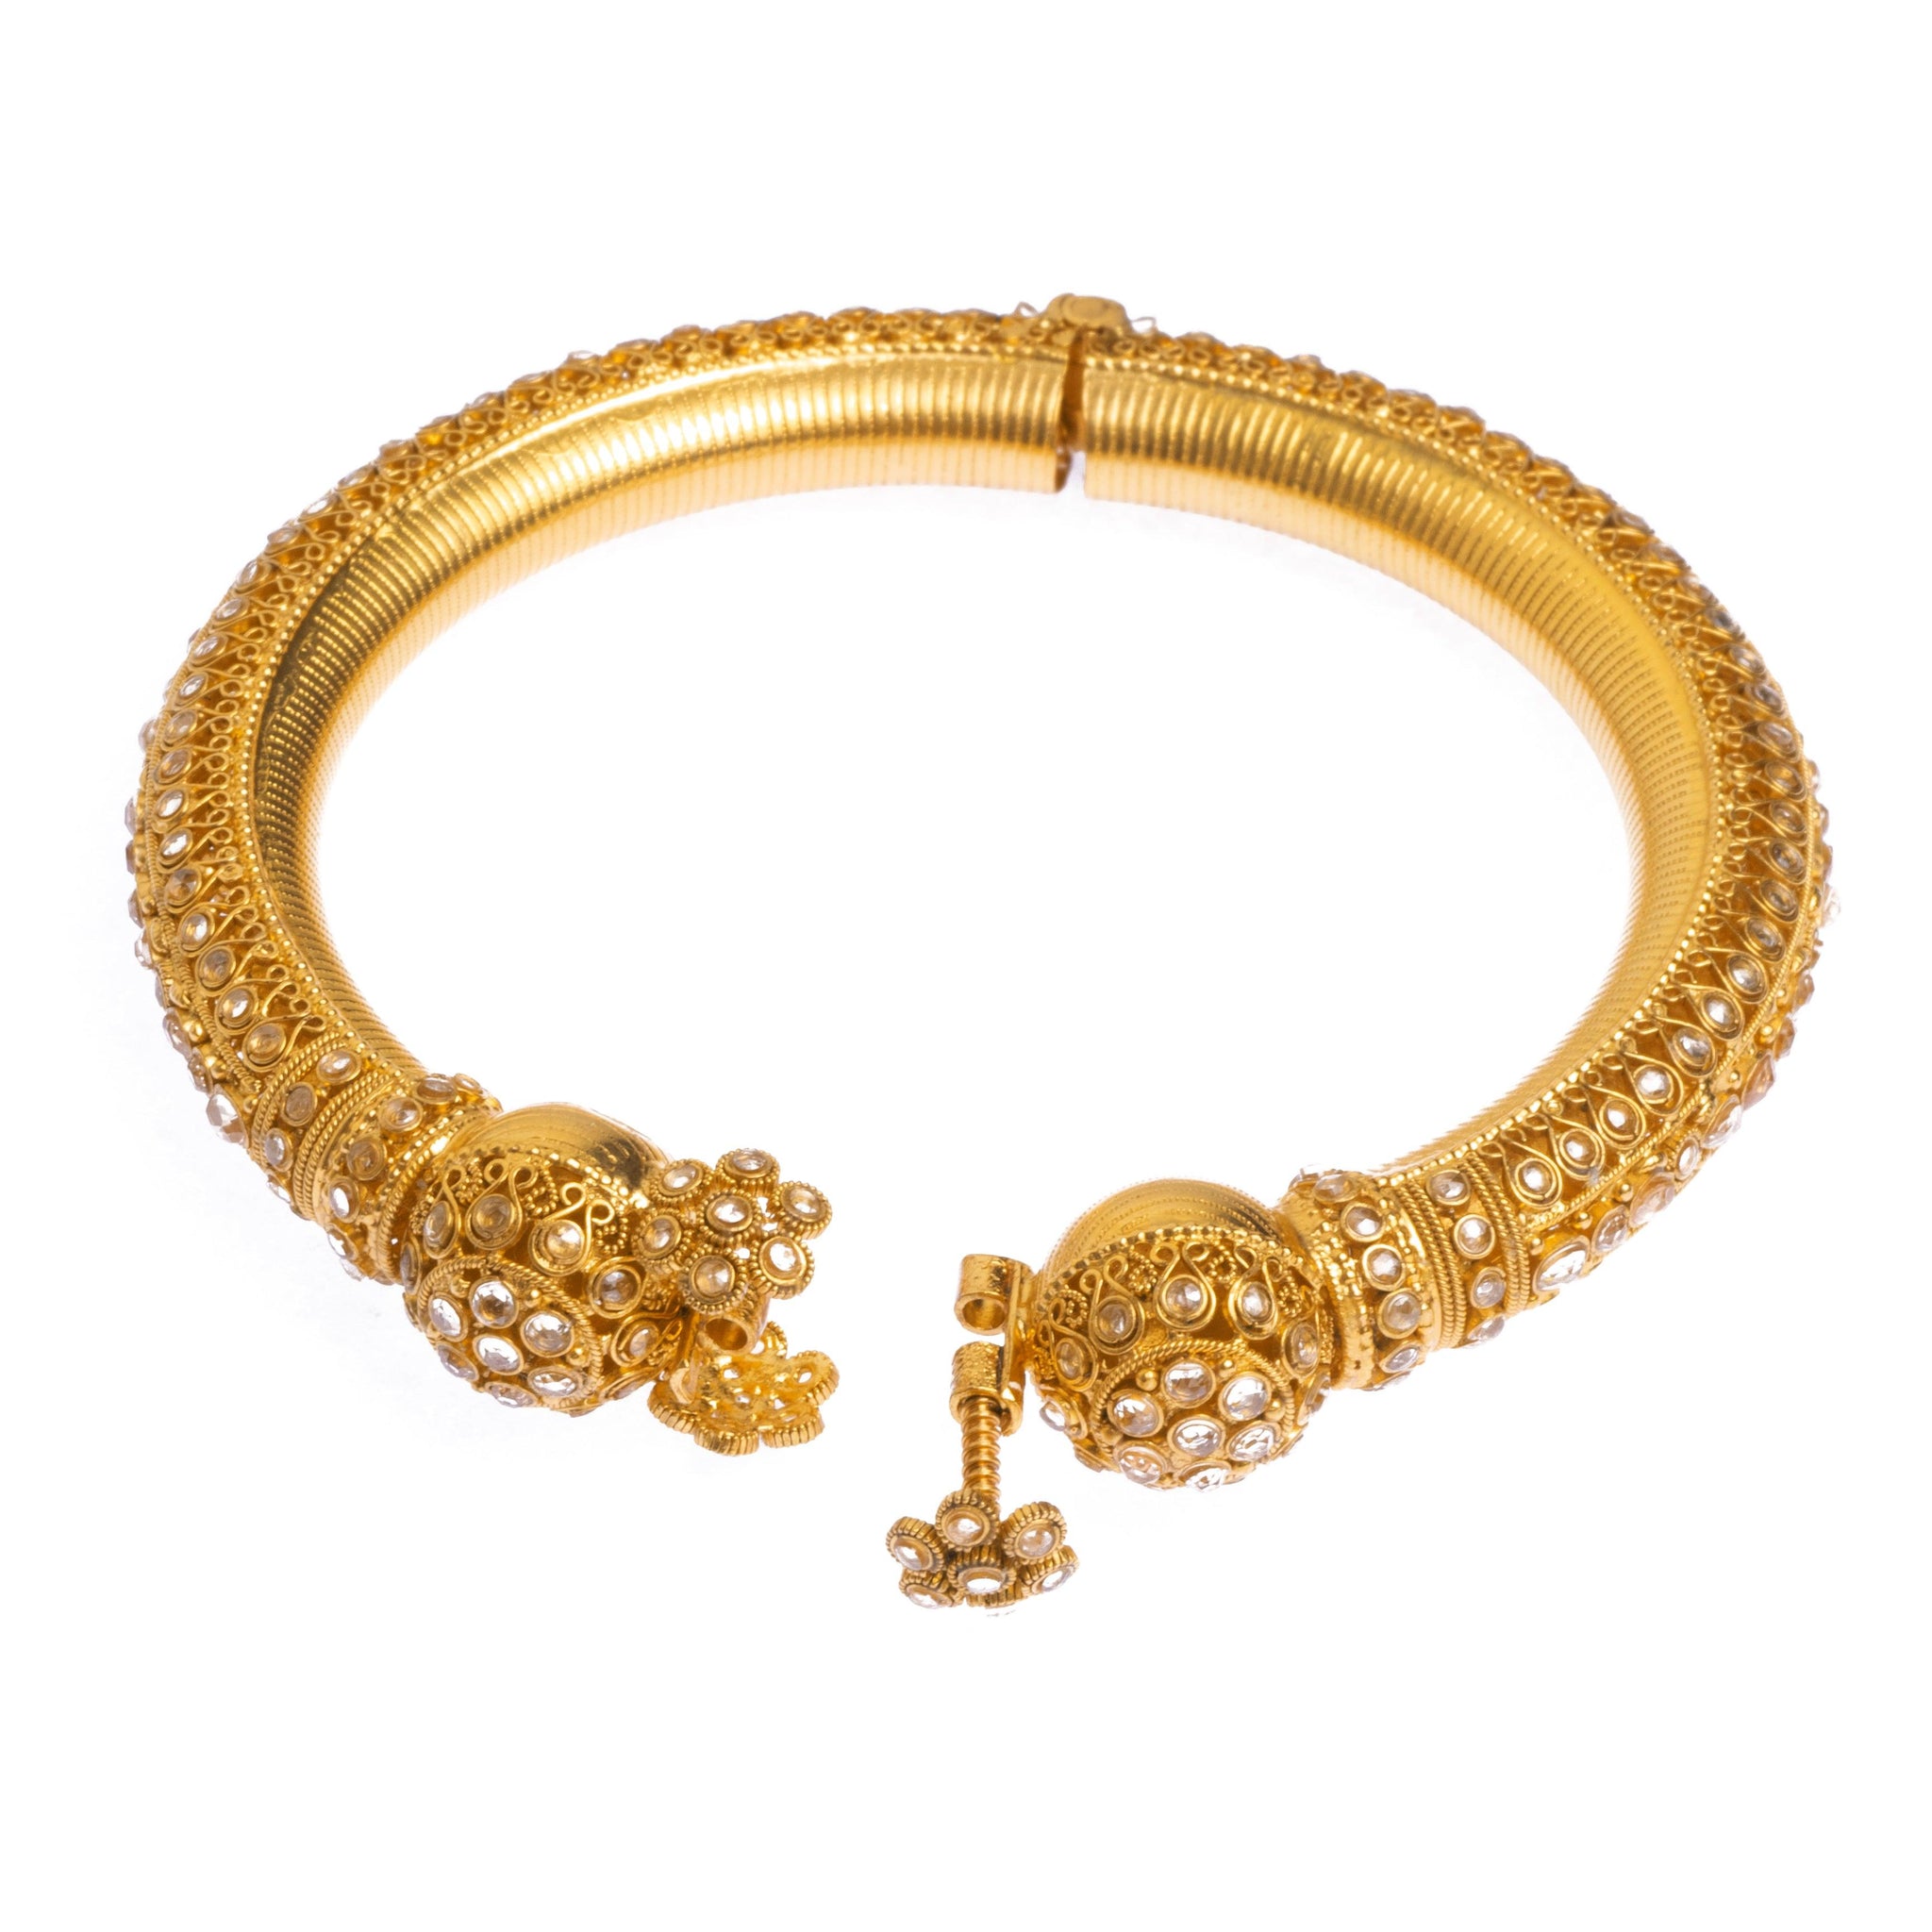 Pair of 22ct Gold Antiquated Look Openable Comfort Fit Bangles with Polki Style Stones B-8287